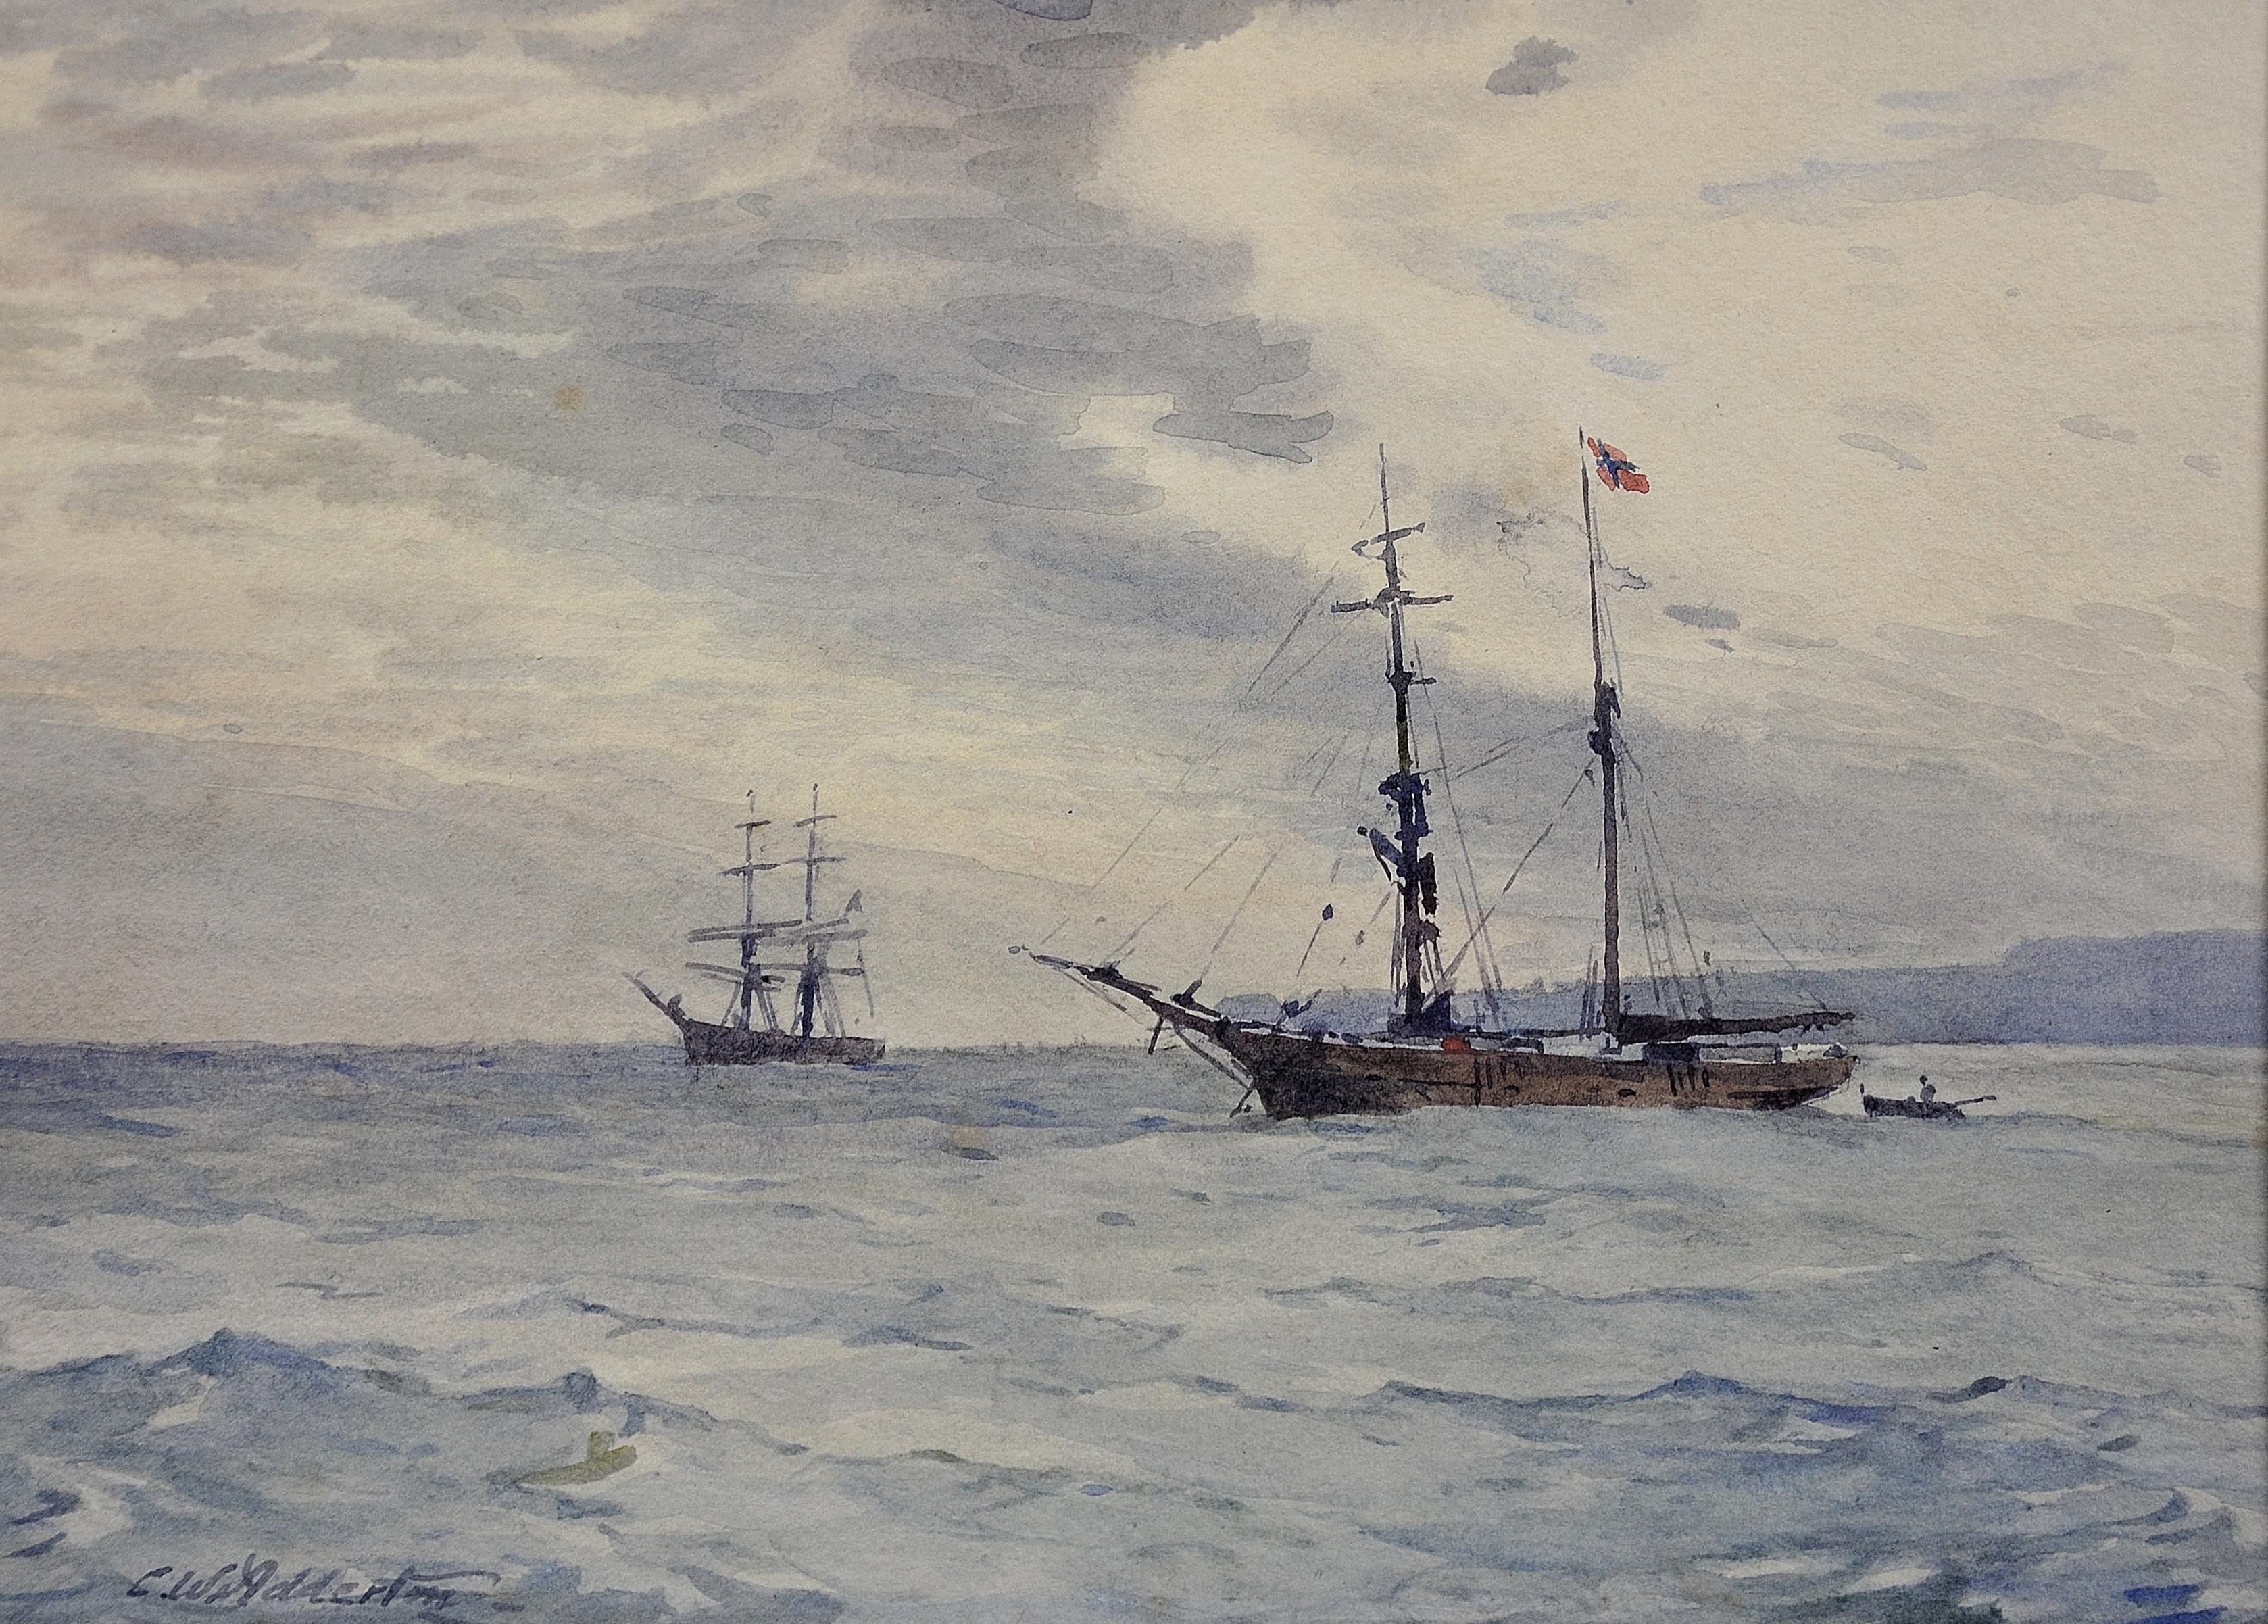 Charles William Adderton. 
English ( b.1866 - d.1944 ).
Norwegian barques at anchor, Lyme Bay, English Channel.
Watercolor. Signed.
Image size 10.6 inches x 14.4 inches ( 27cm x 36.5cm ).
Frame size 16.6 inches x 20.1 inches ( 42cm x 51cm